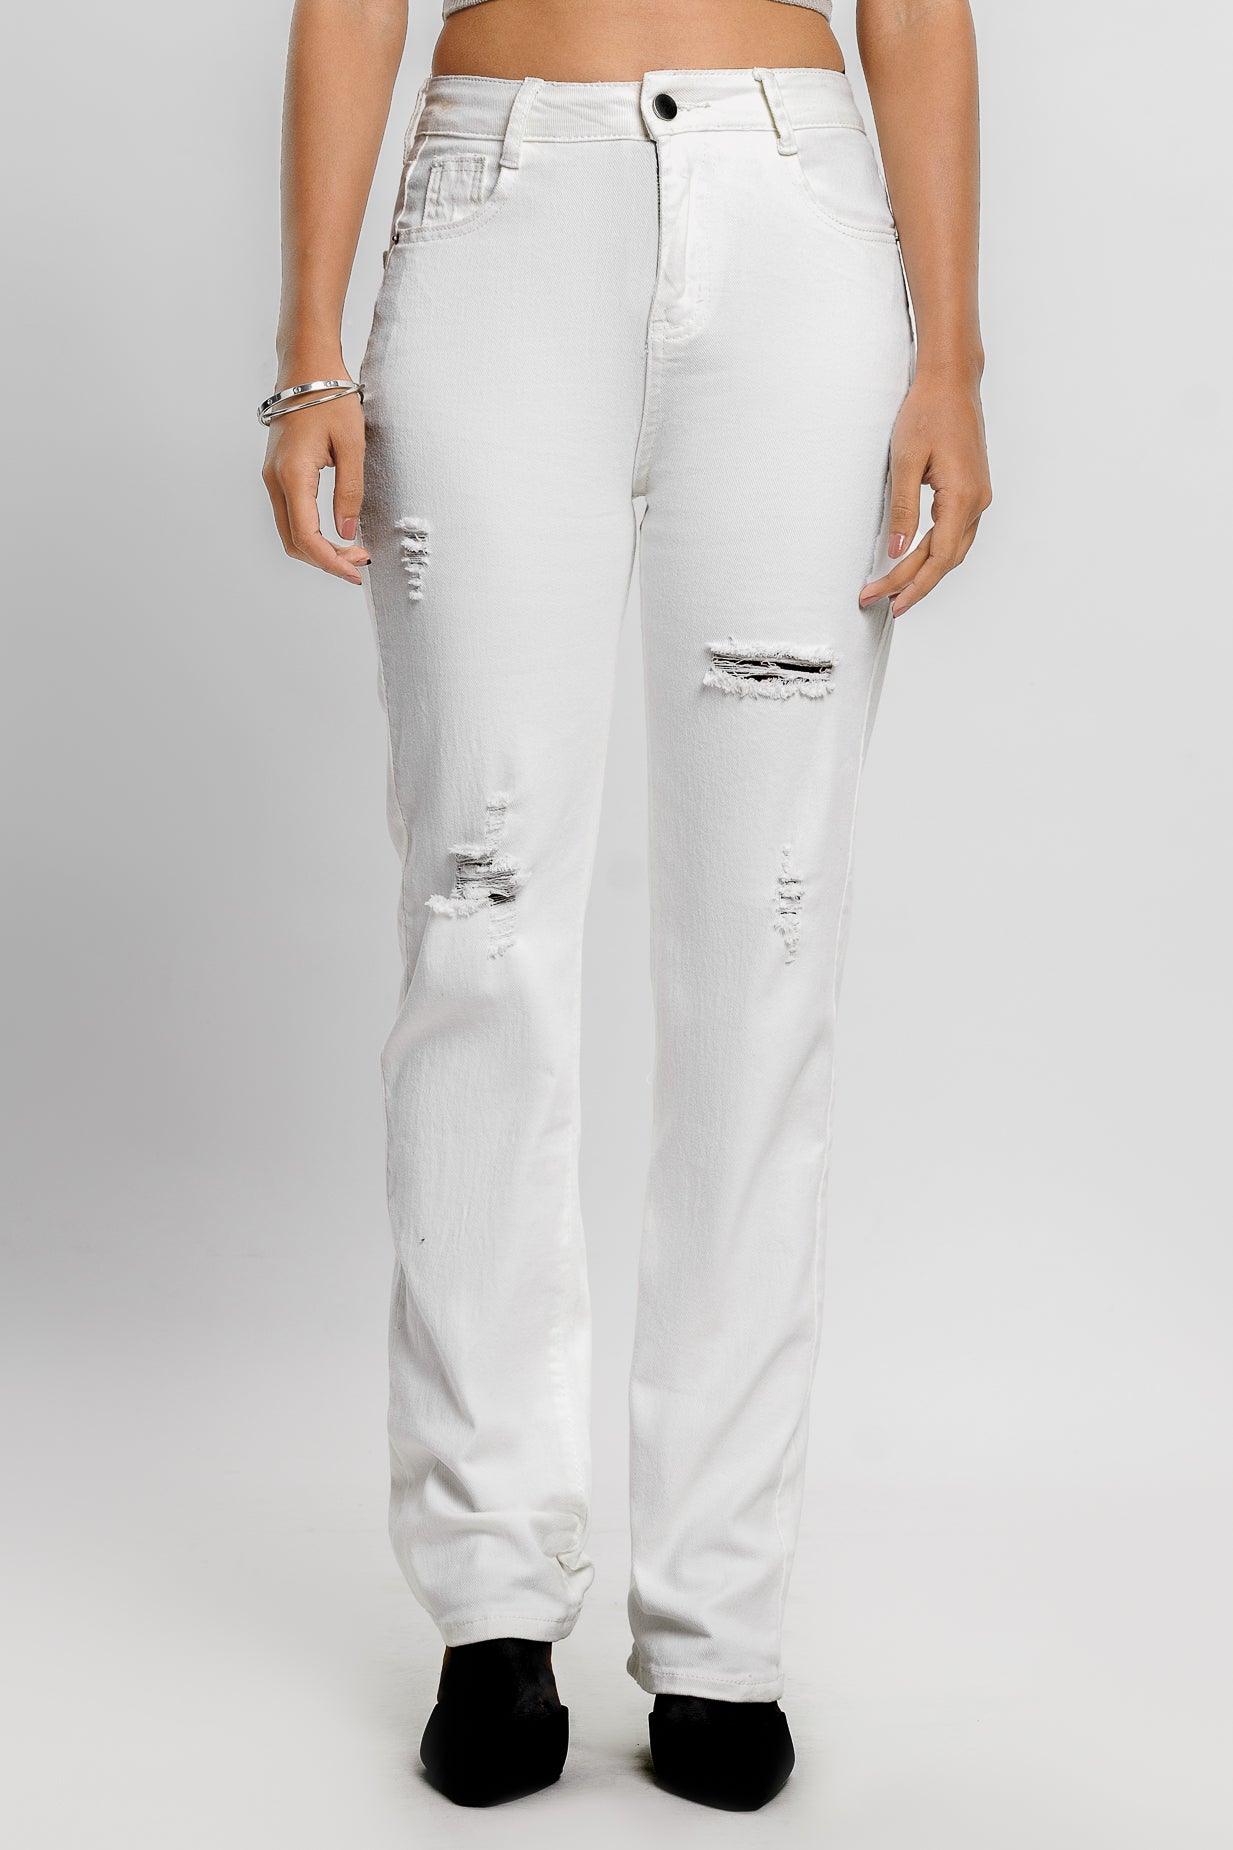 WHITE SLIM FIT DISTRESSED JEANS